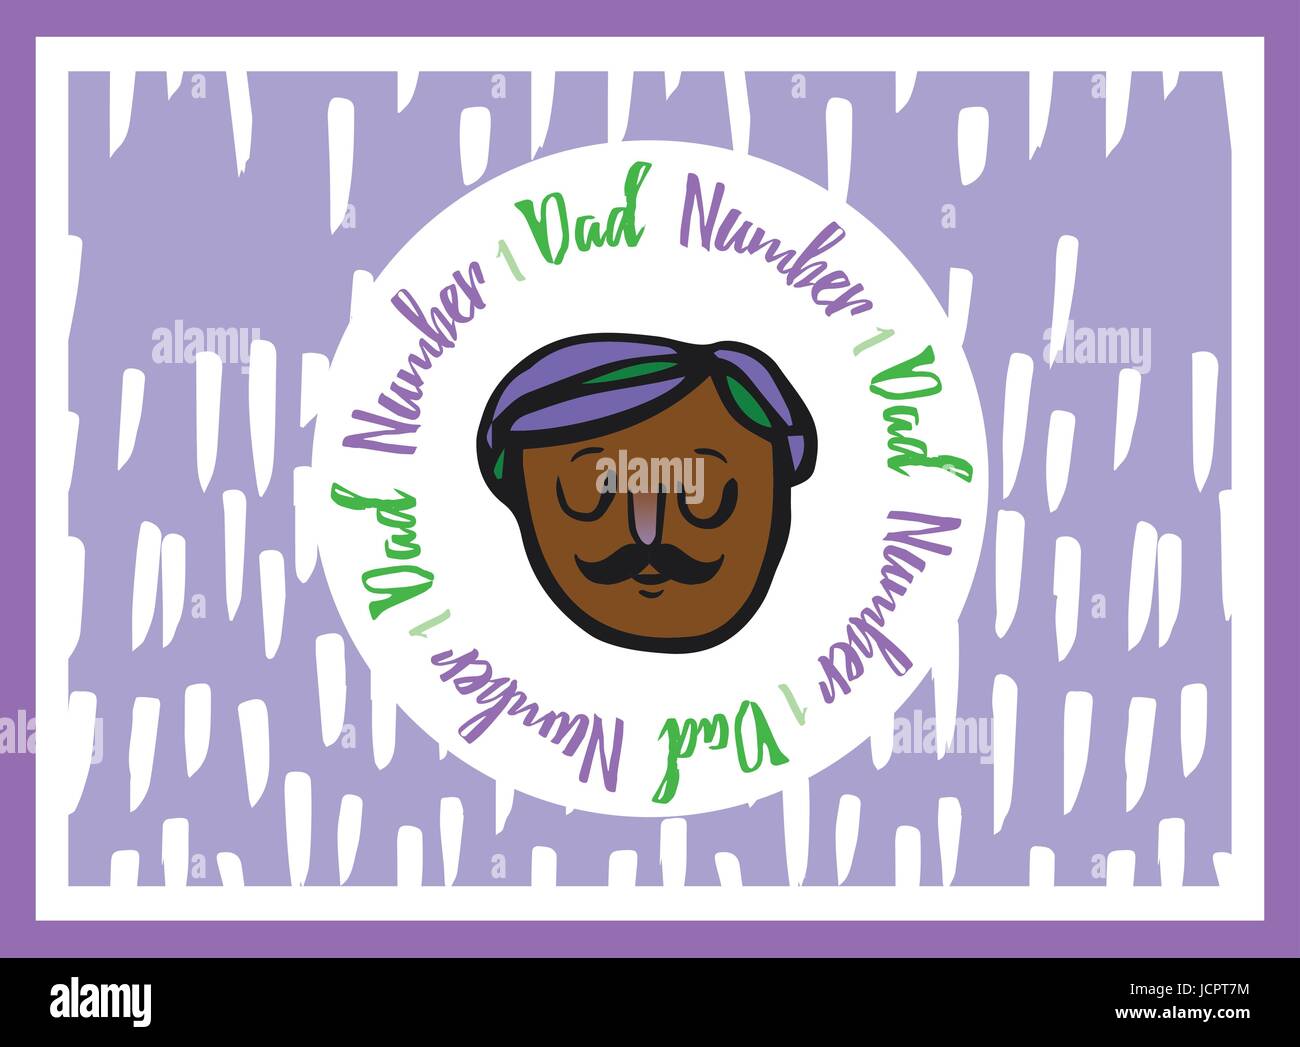 Greeting card with fathers day message Stock Vector